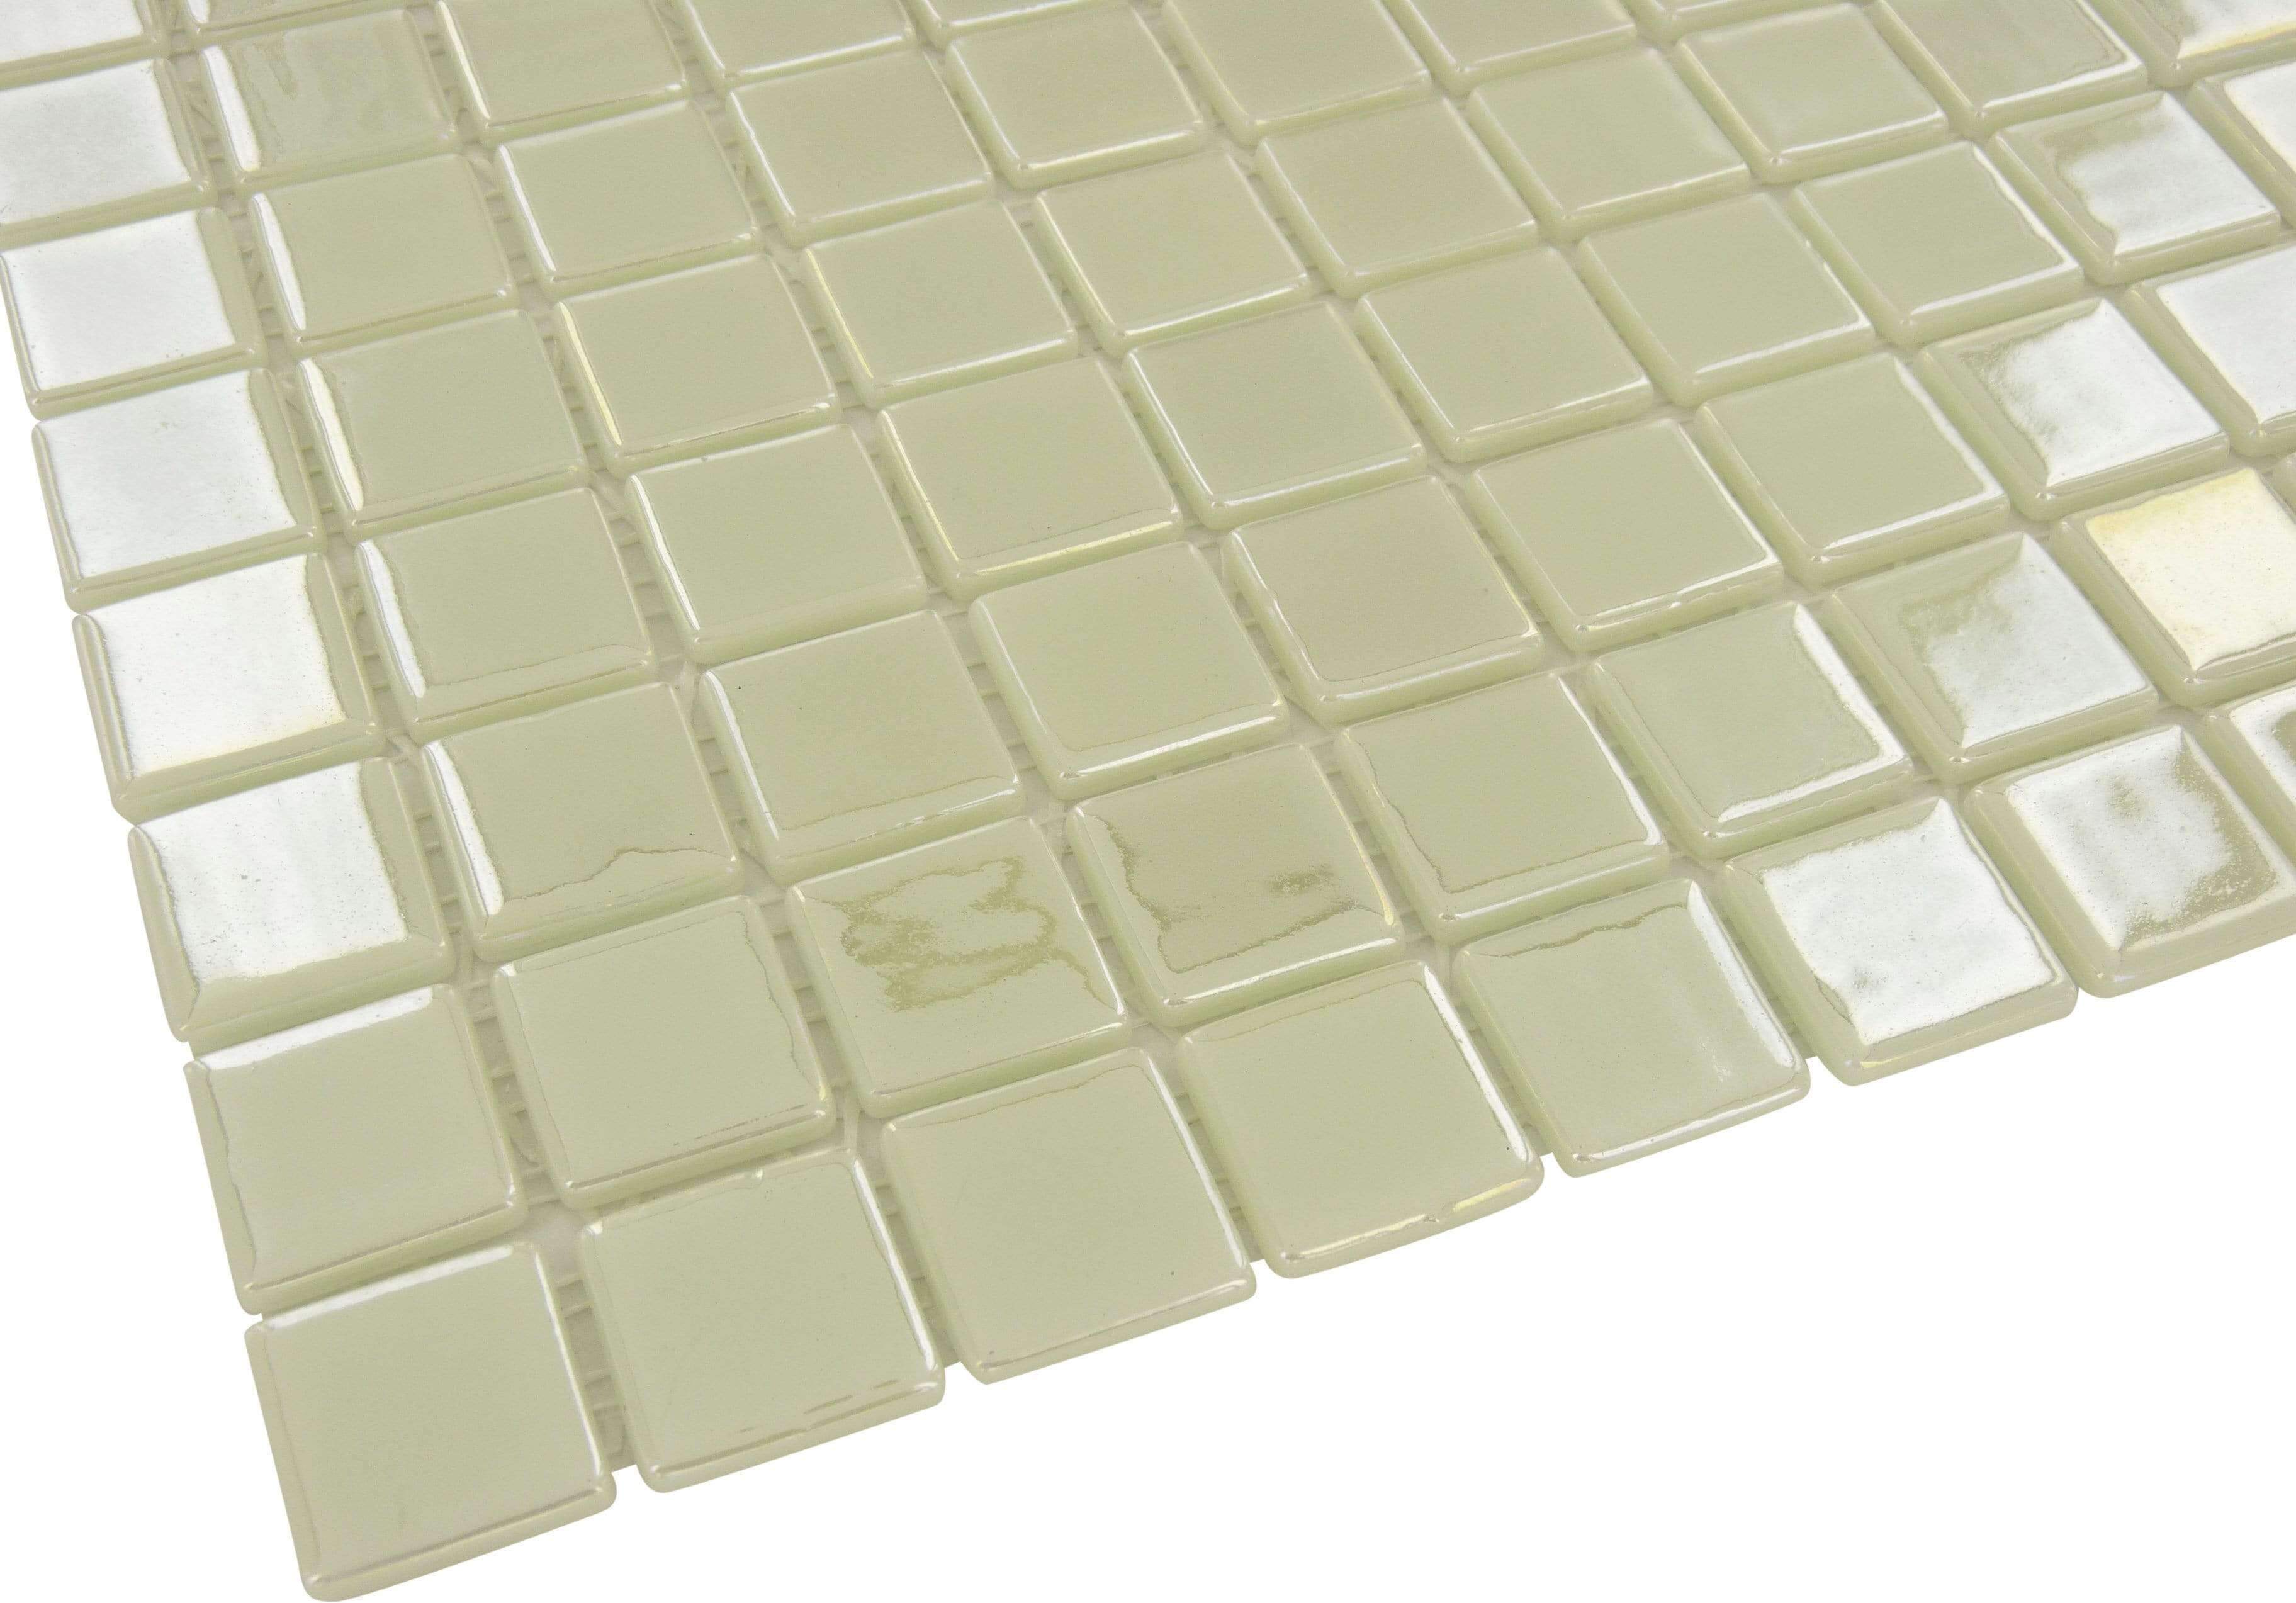 Glowing Glass Mosaic 2x2 square glass tile mosaic pool and wall tile